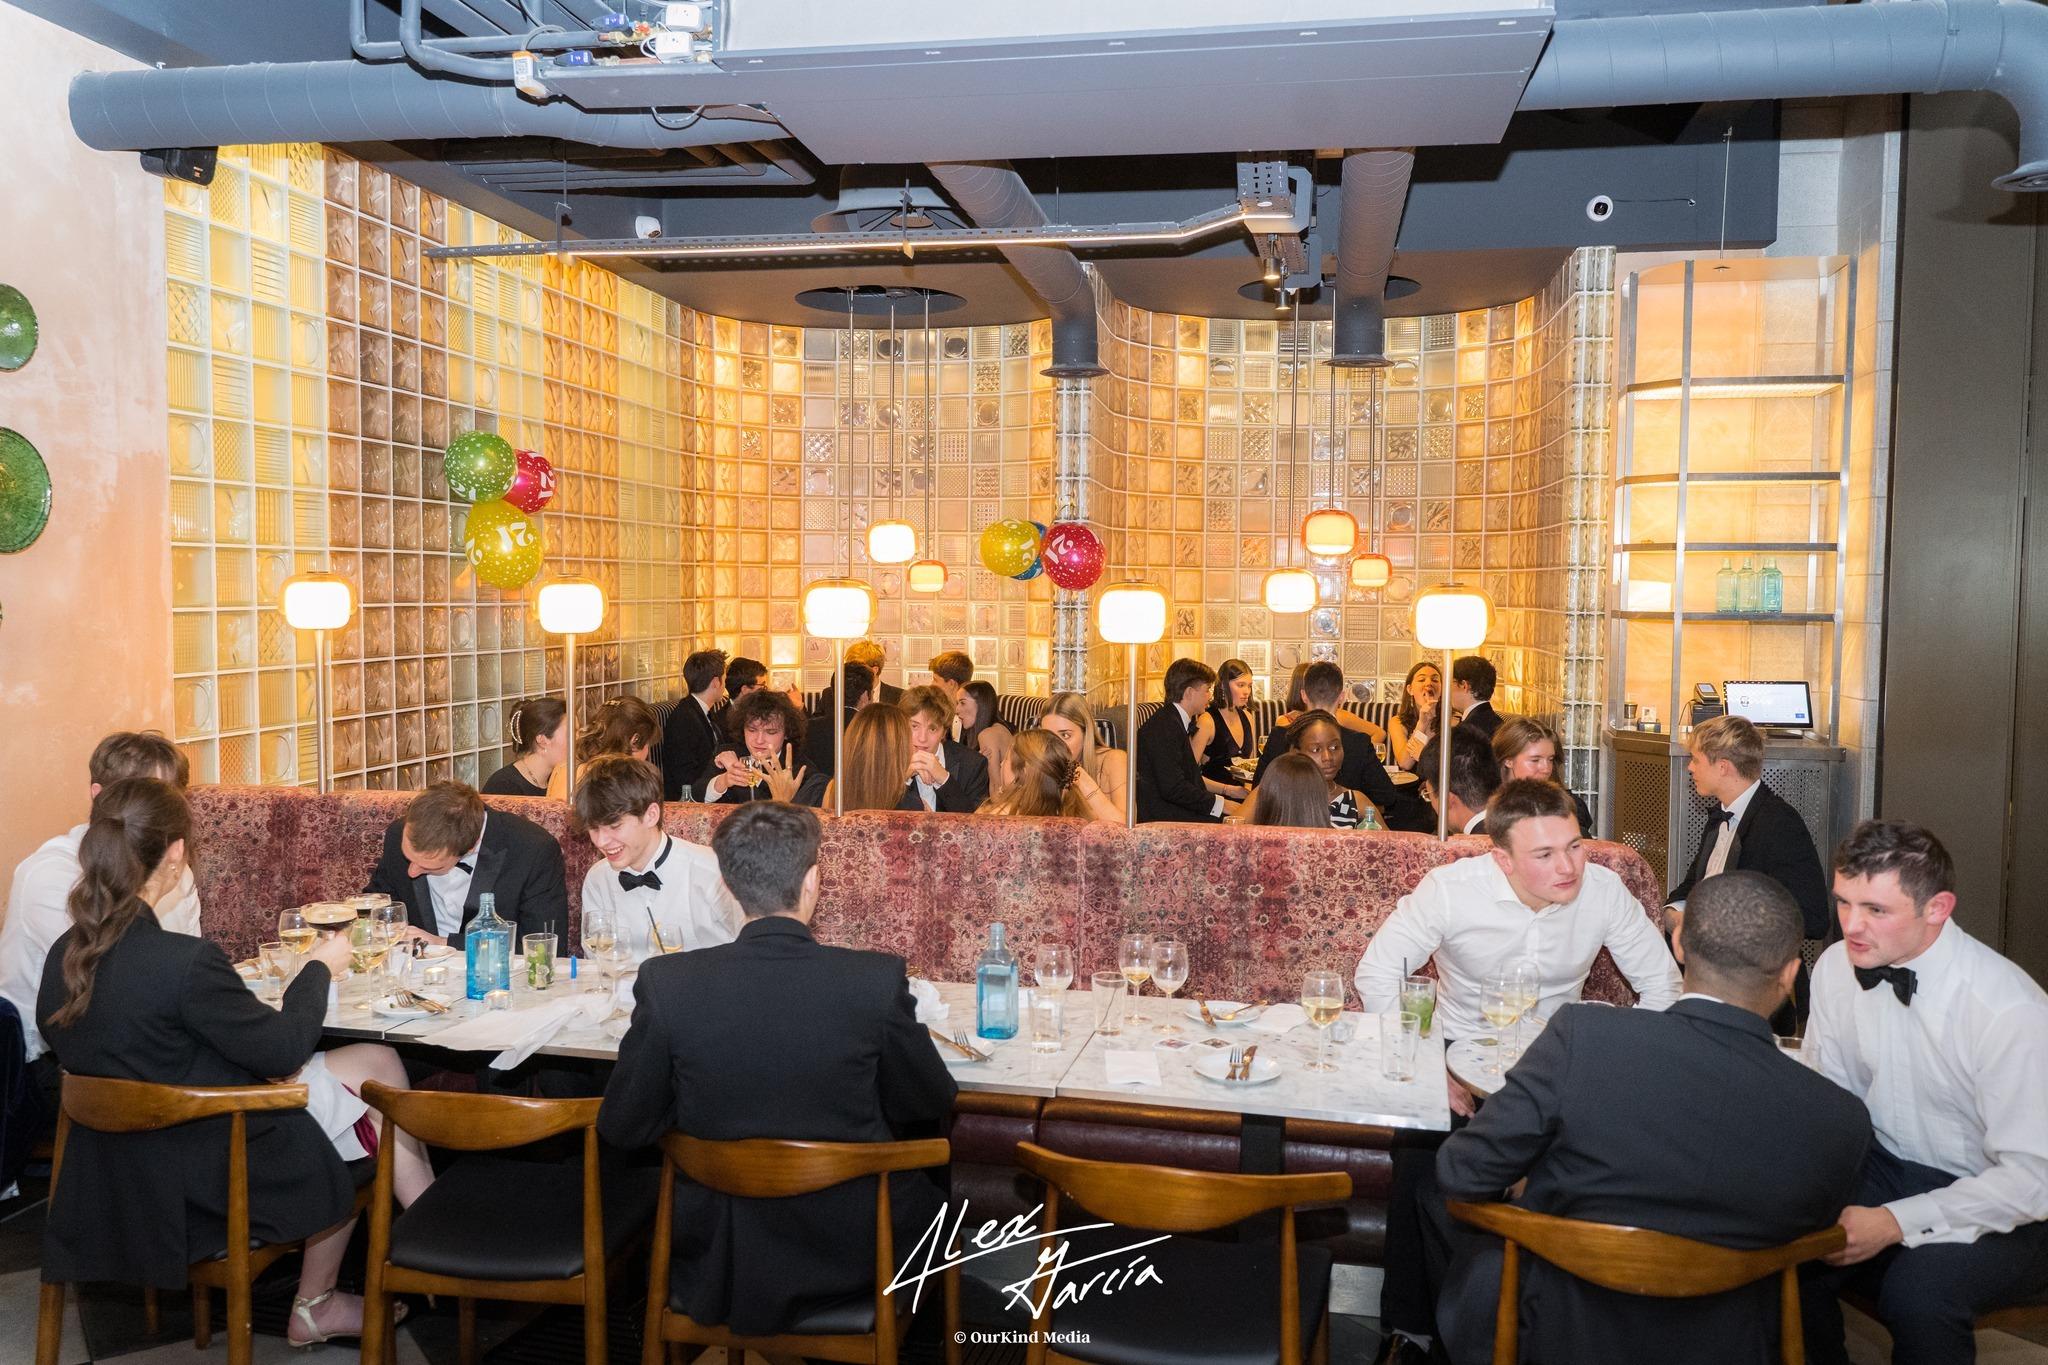 Le Bab, Covent Garden, Drink Receptions & Parties - The Lounge Covent Garden photo #1